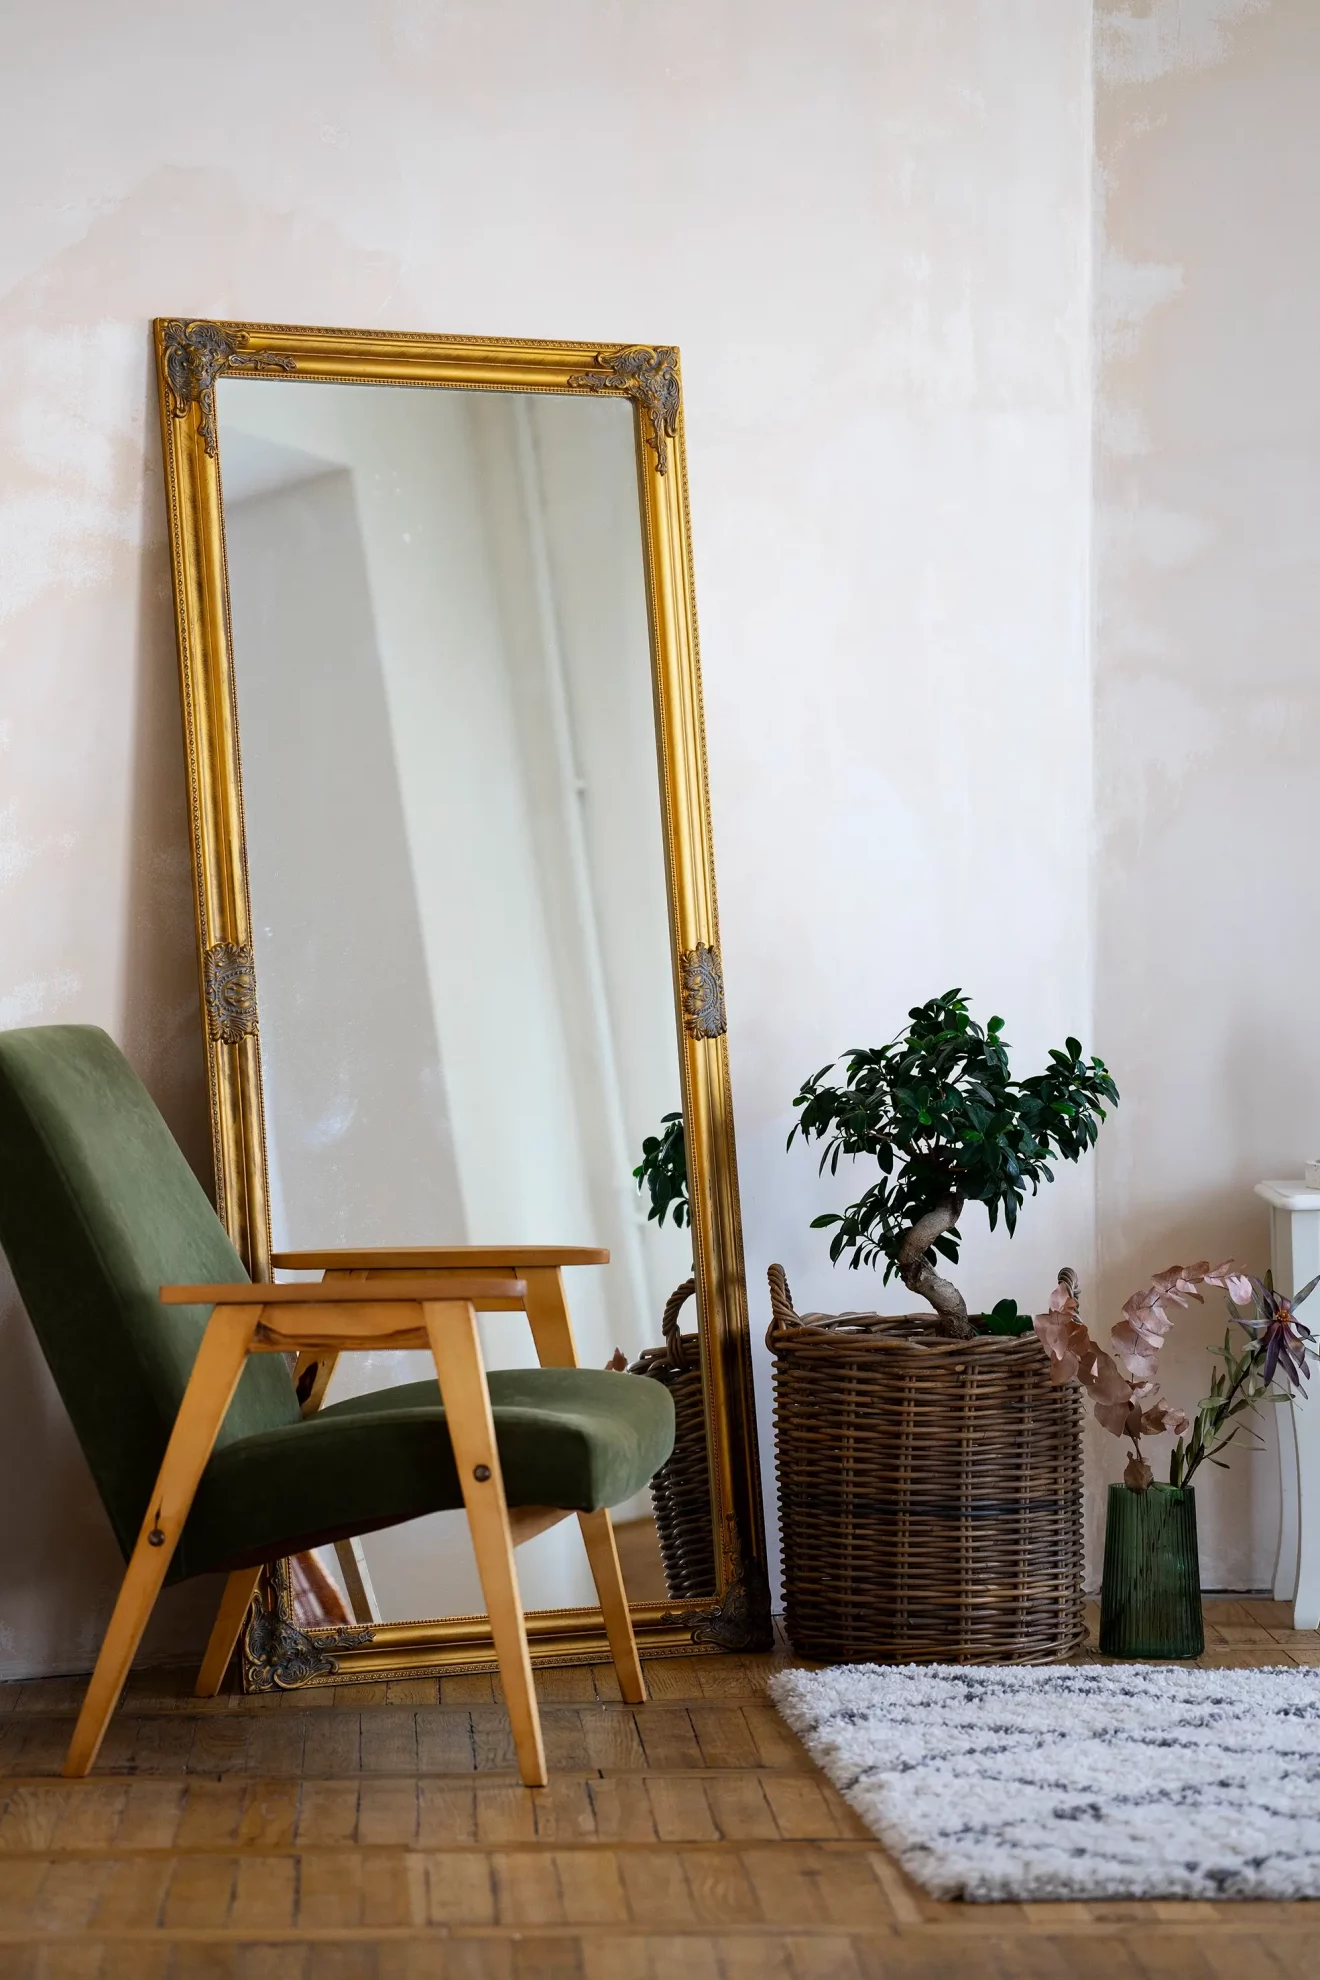 interior-decor-with-mirror-and-potted-plant